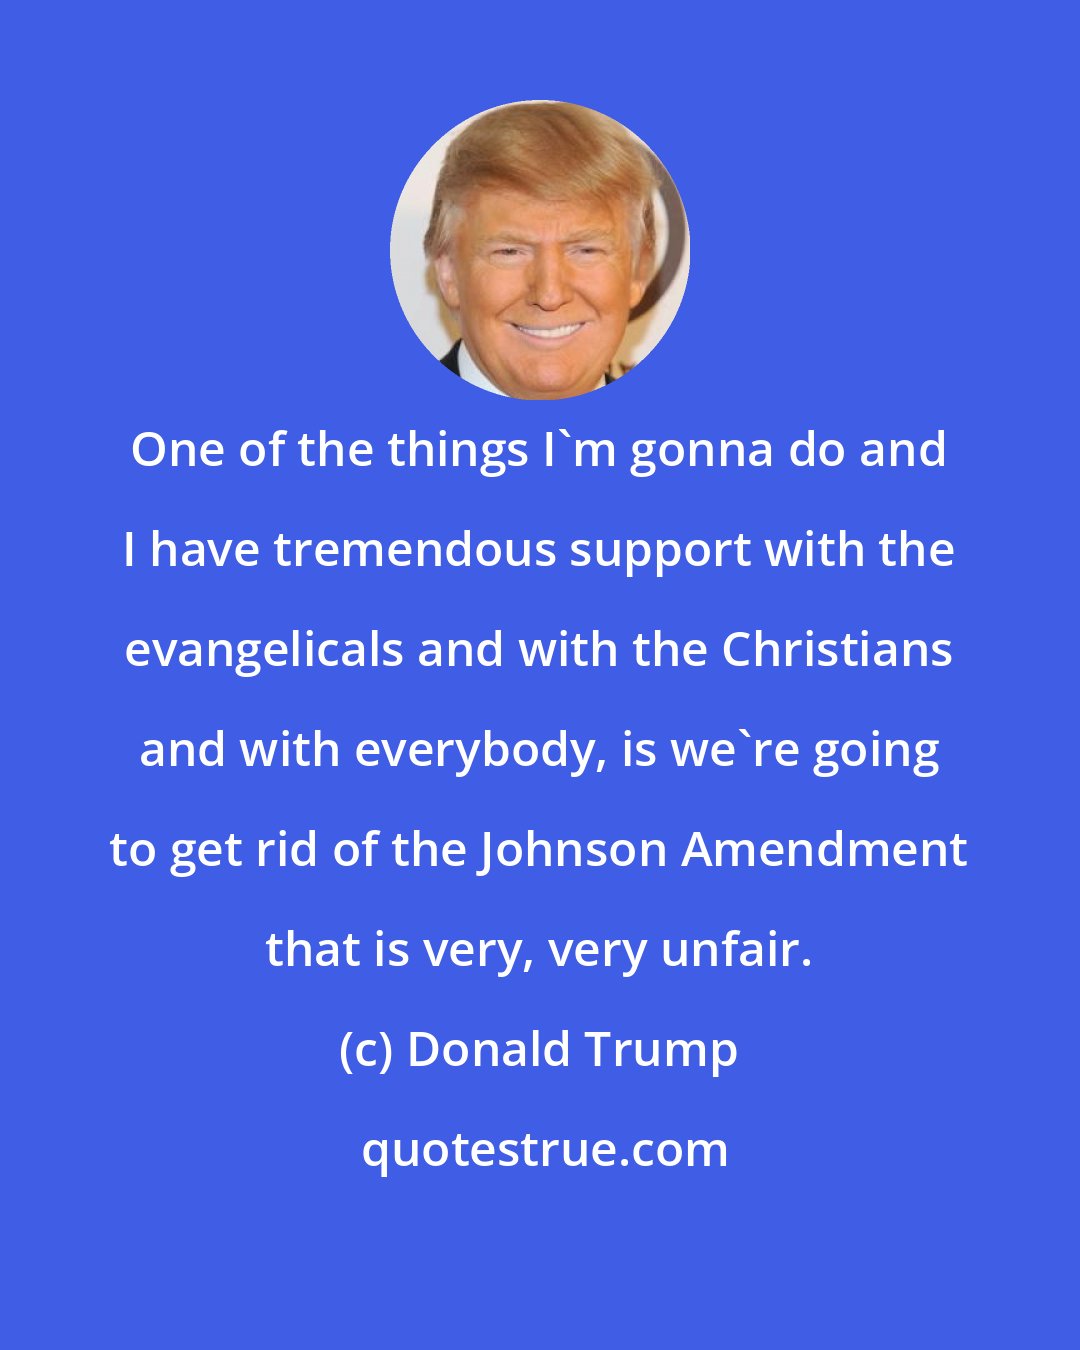 Donald Trump: One of the things I'm gonna do and I have tremendous support with the evangelicals and with the Christians and with everybody, is we're going to get rid of the Johnson Amendment that is very, very unfair.